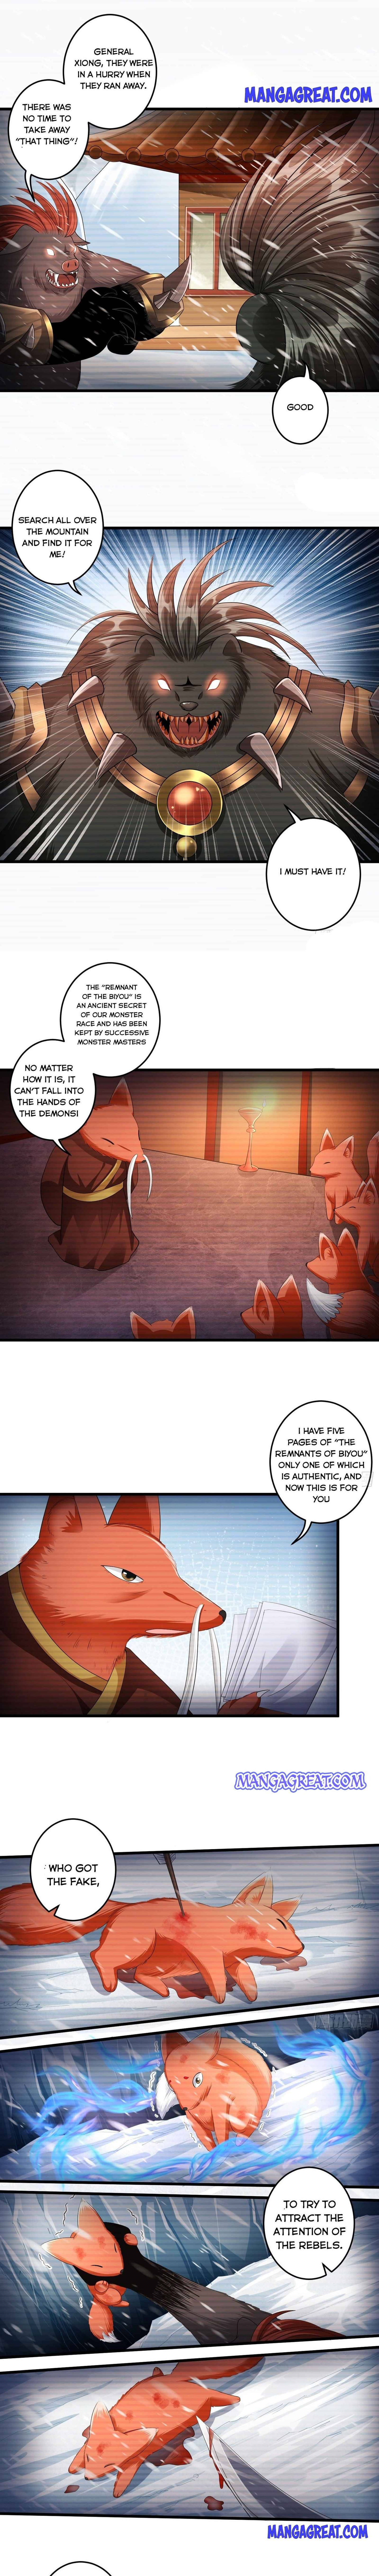 I Became A System - Page 2